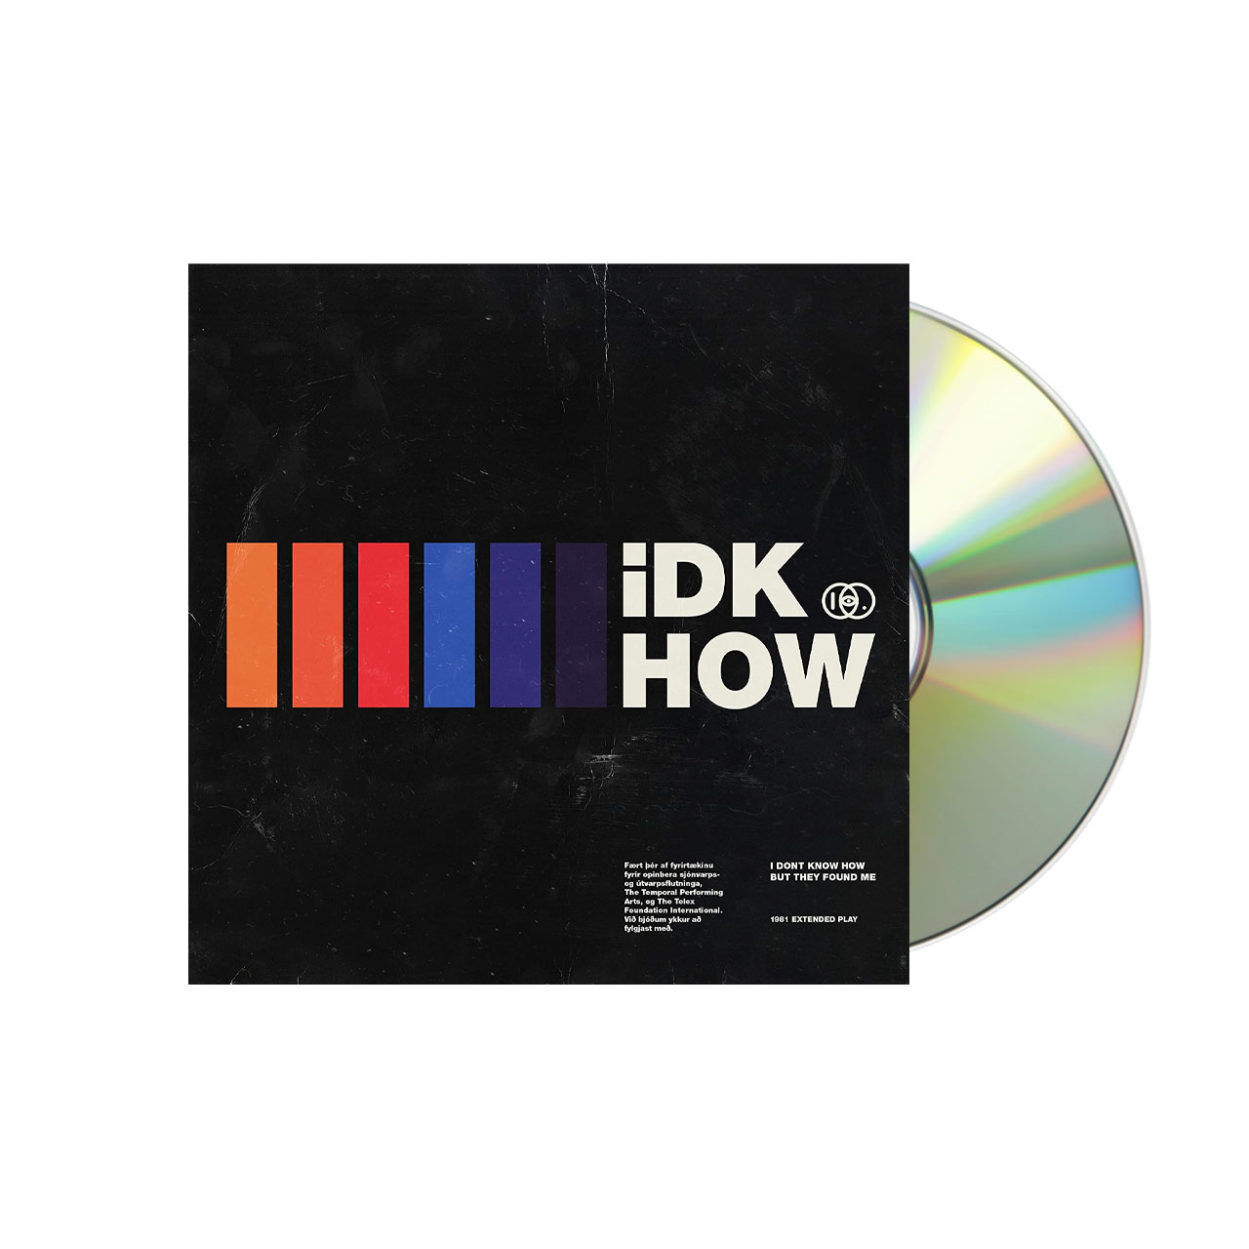 IDKHOW 1981 Extended Play CD